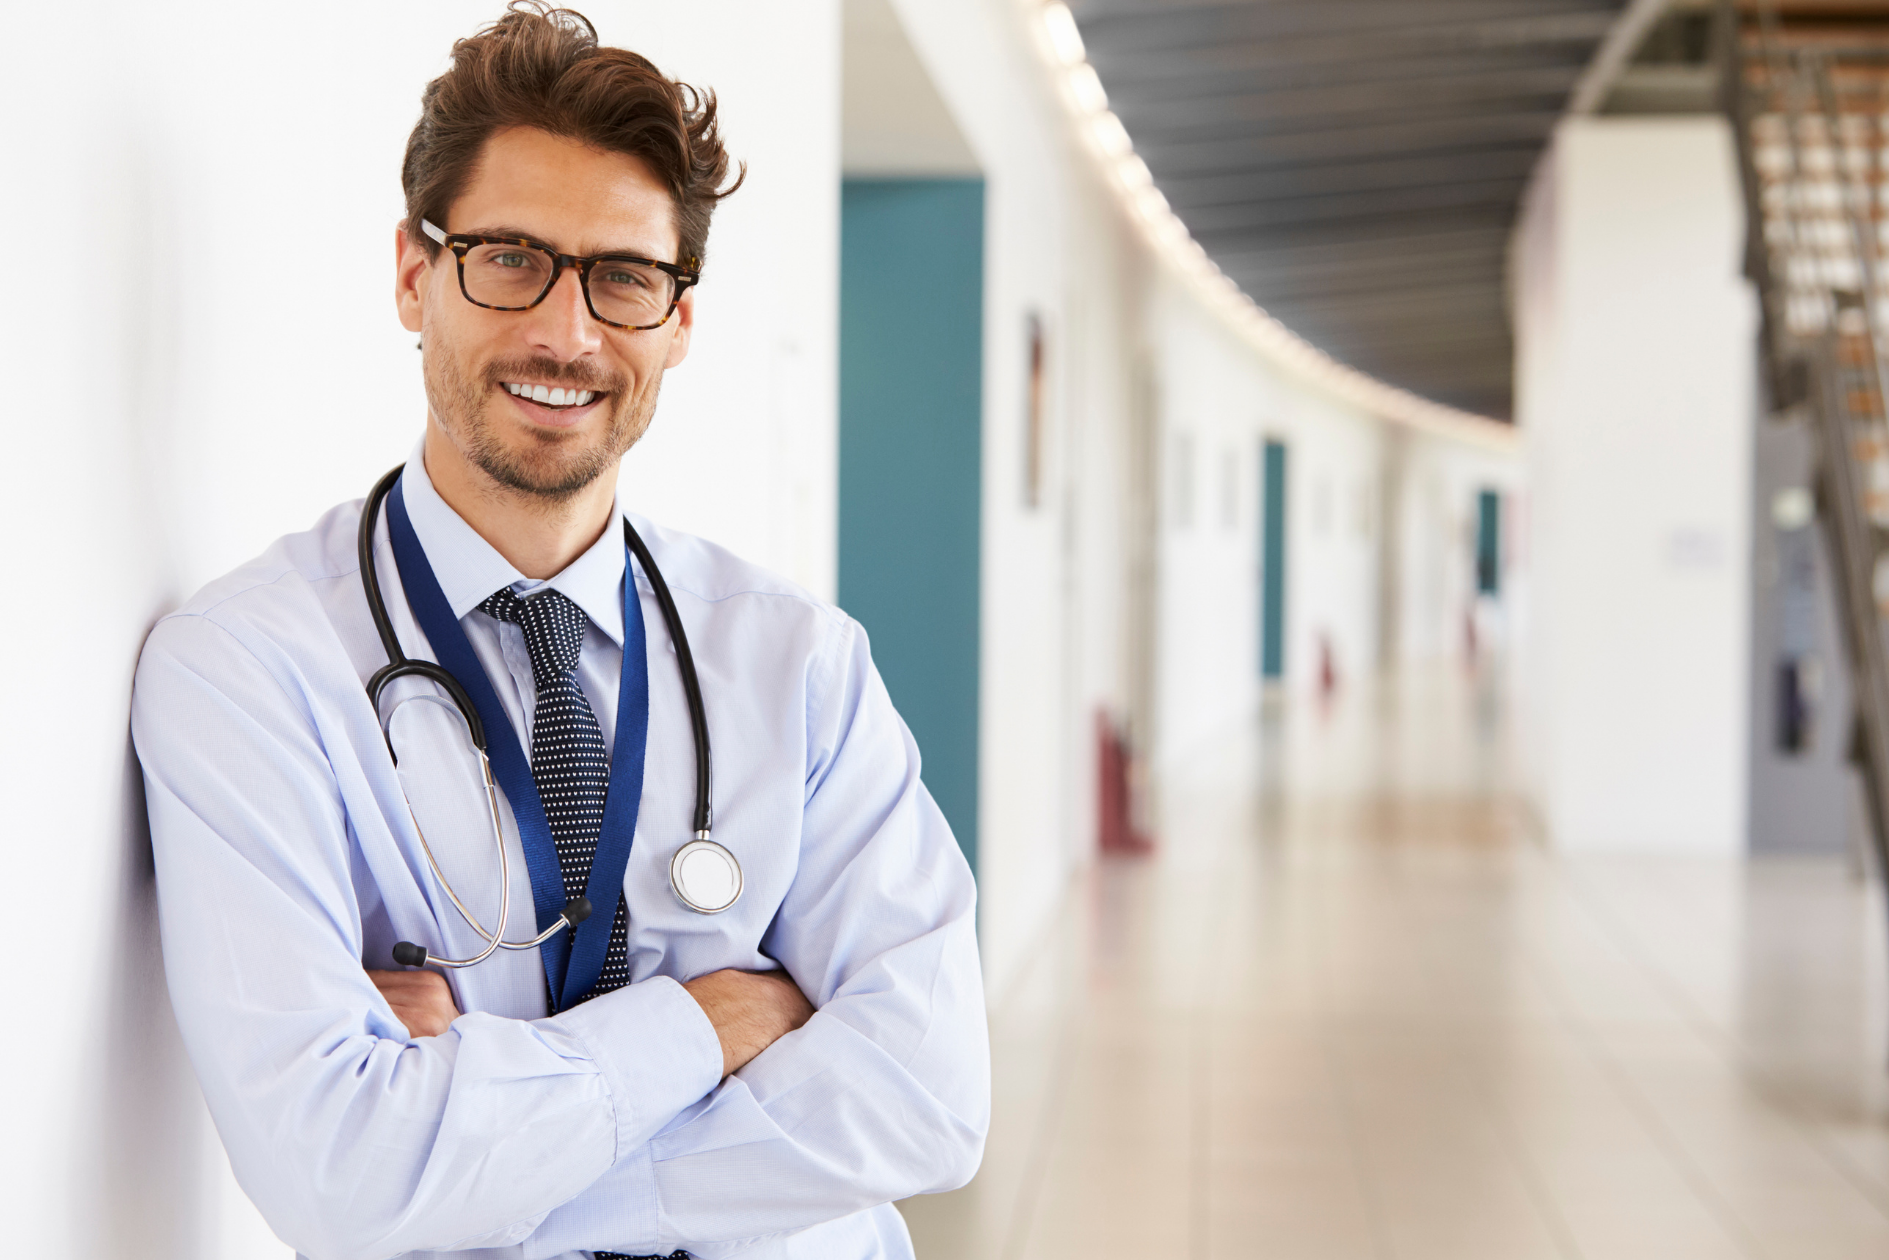 Take Control of Your Healthcare Career: 5 Life-Changing Benefits of Working Locum Tenens